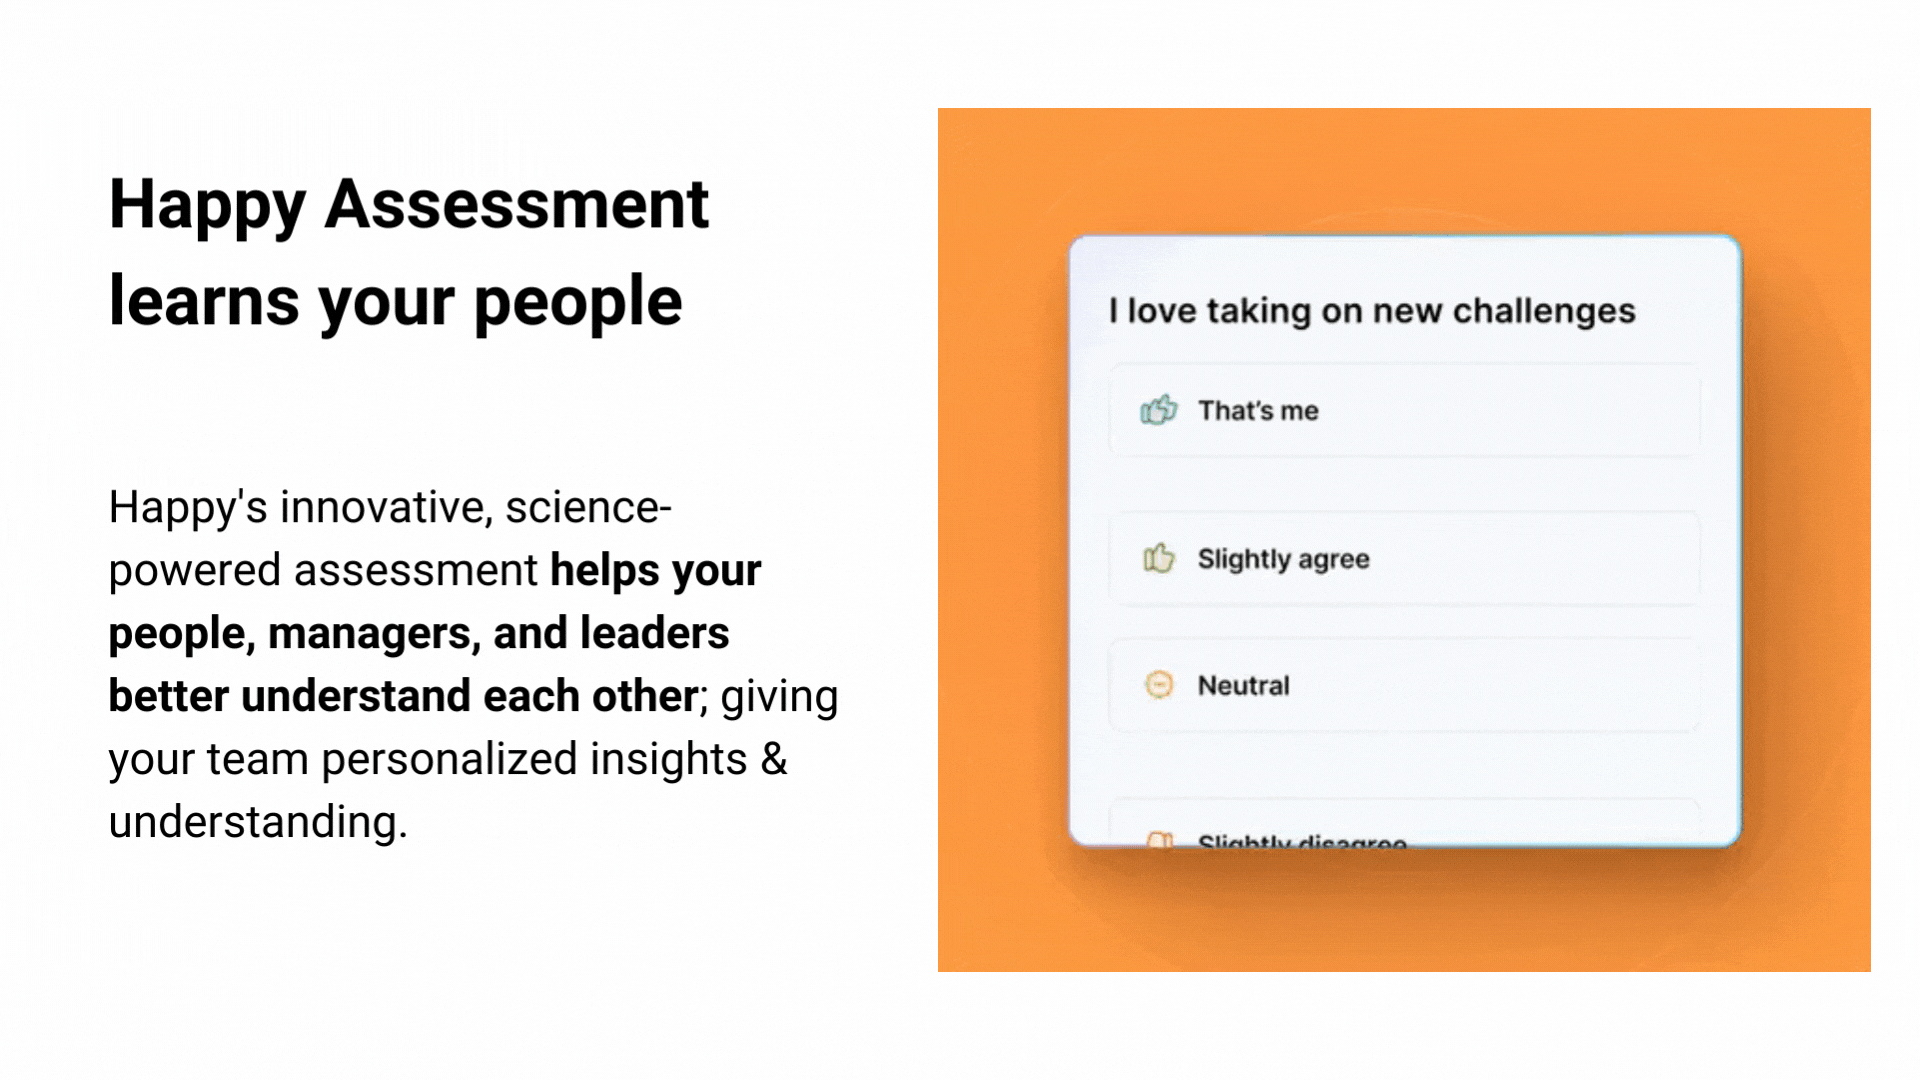 Gif image of the Happy Assessment next to text that reads "Happy Assessment learns your people. Happy’s innovative science-powered assessment helps your people and leaders better understand each other–giving your team personalized insights and understanding" 